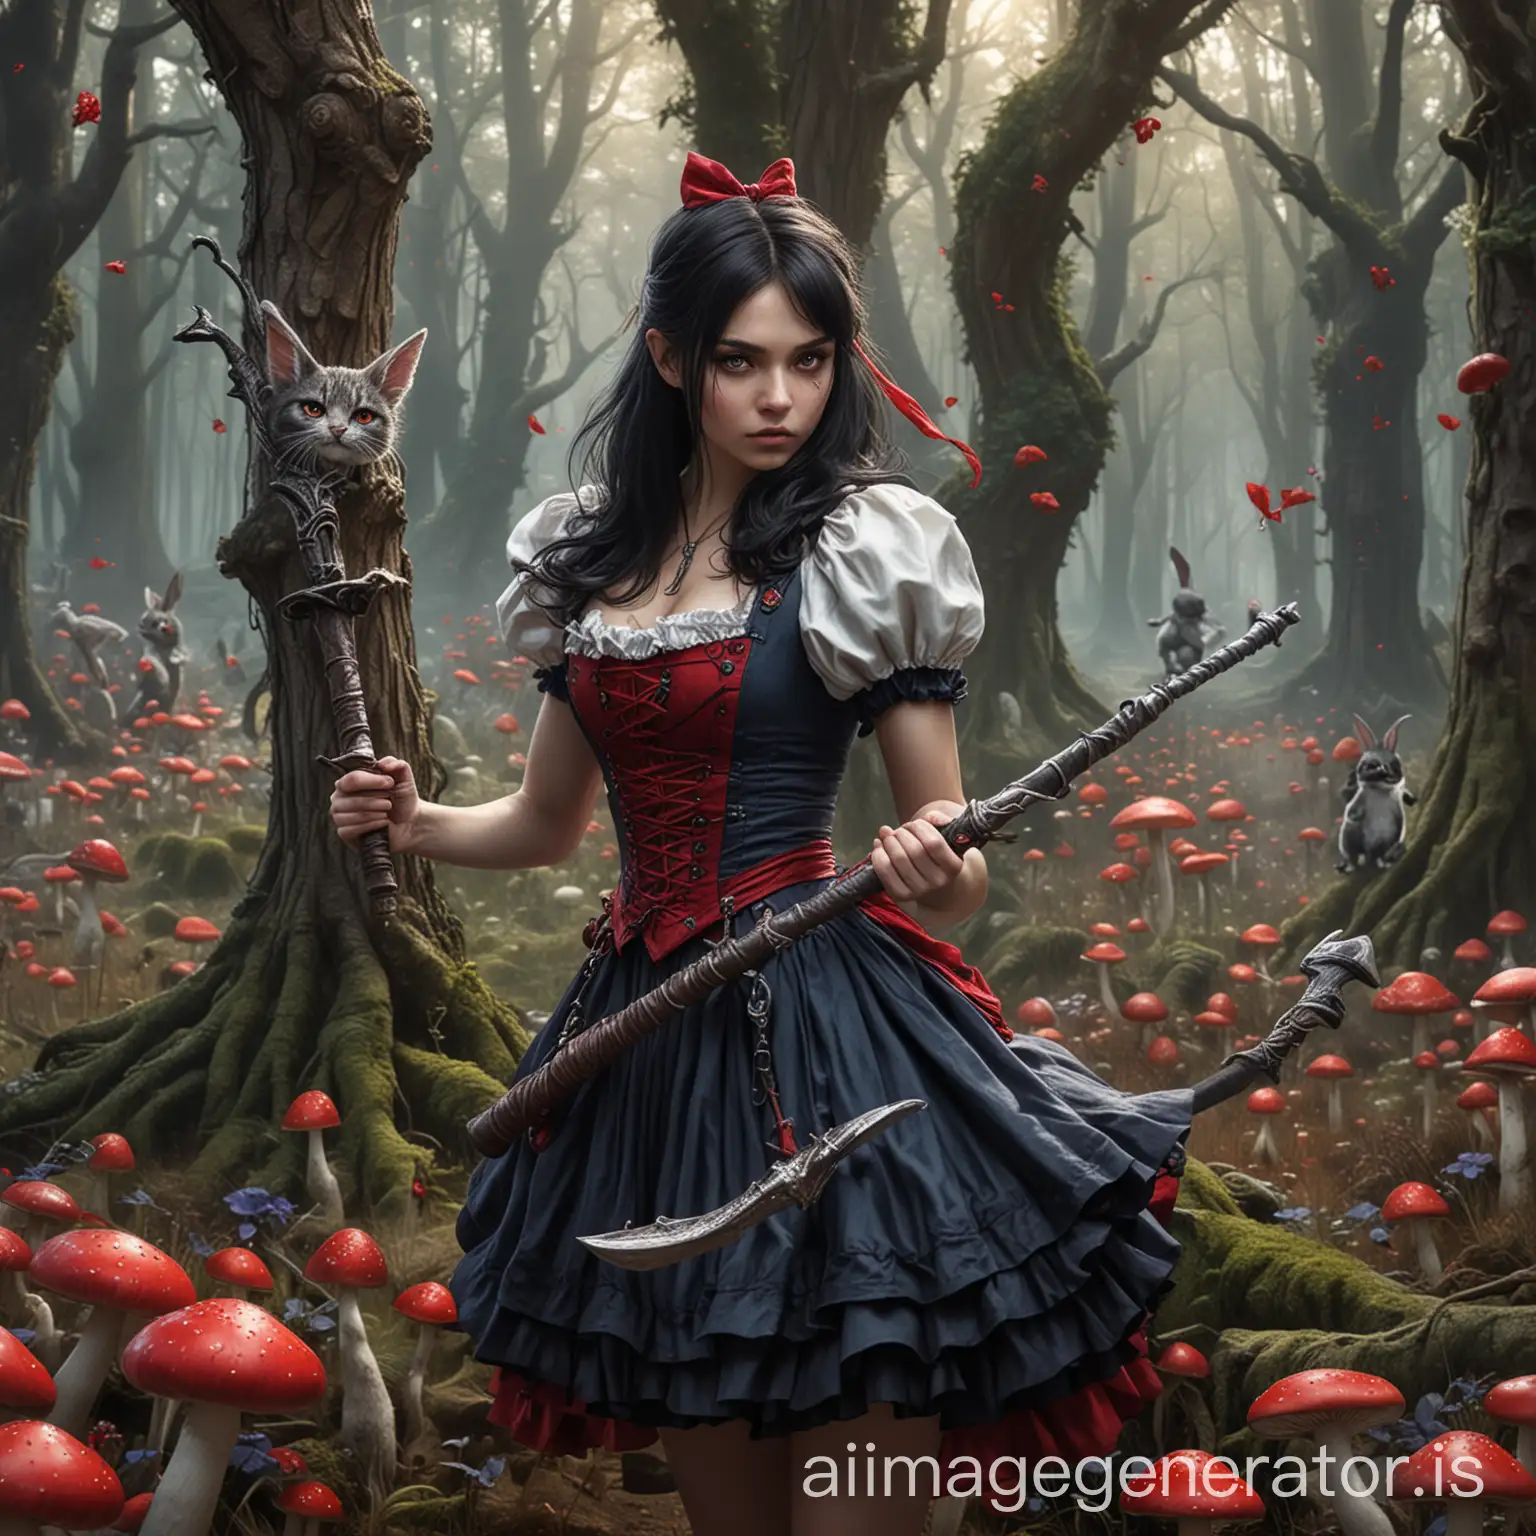 alice with dark hair, beautiful but fierce face, a young but powerful sorcerer, holding a quarter staff weapon, back ground white and red mushrooms, trees and forest with  Cheshire cat in a tree, and bunnies in the background too